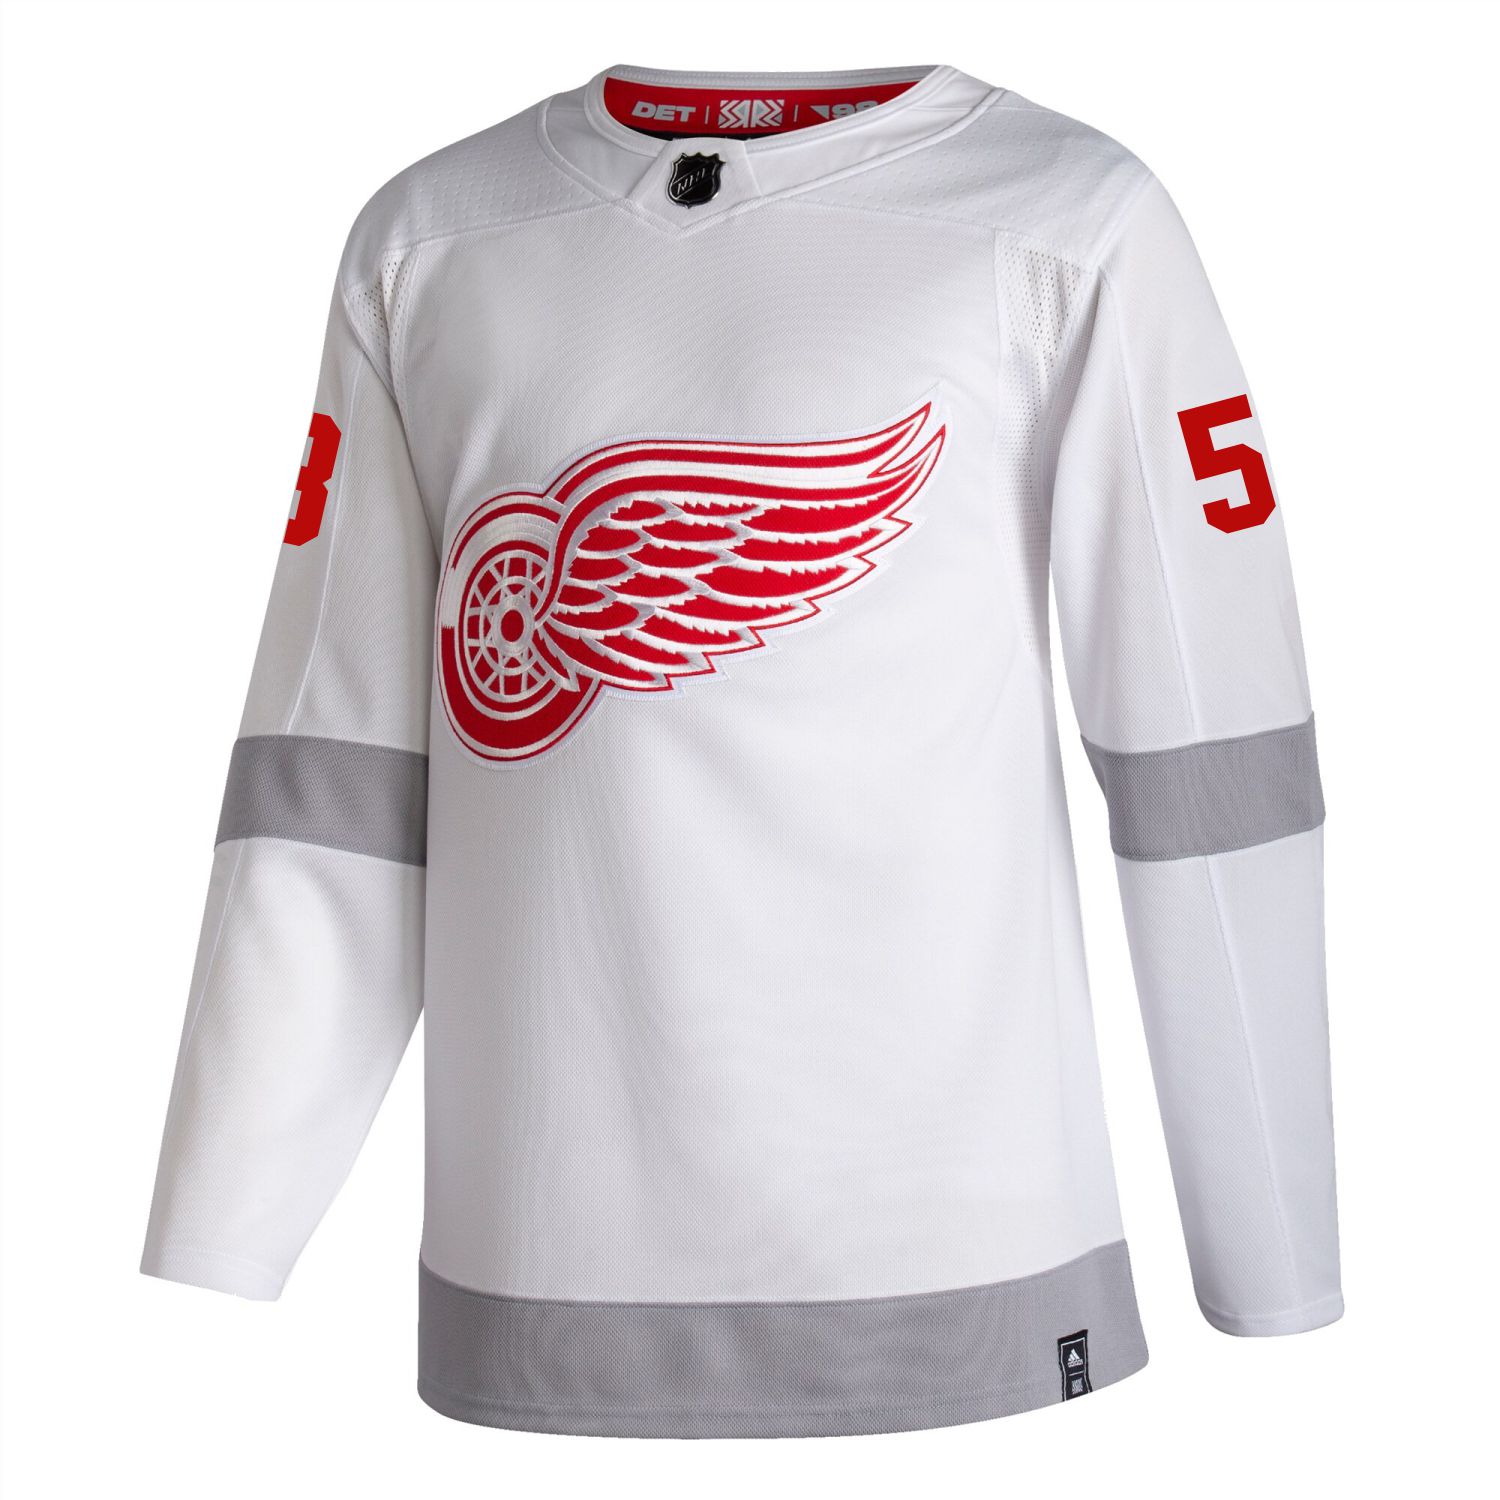 Moritz Seider Detroit Red Wings Adidas Name & Number T-Shirt - Red